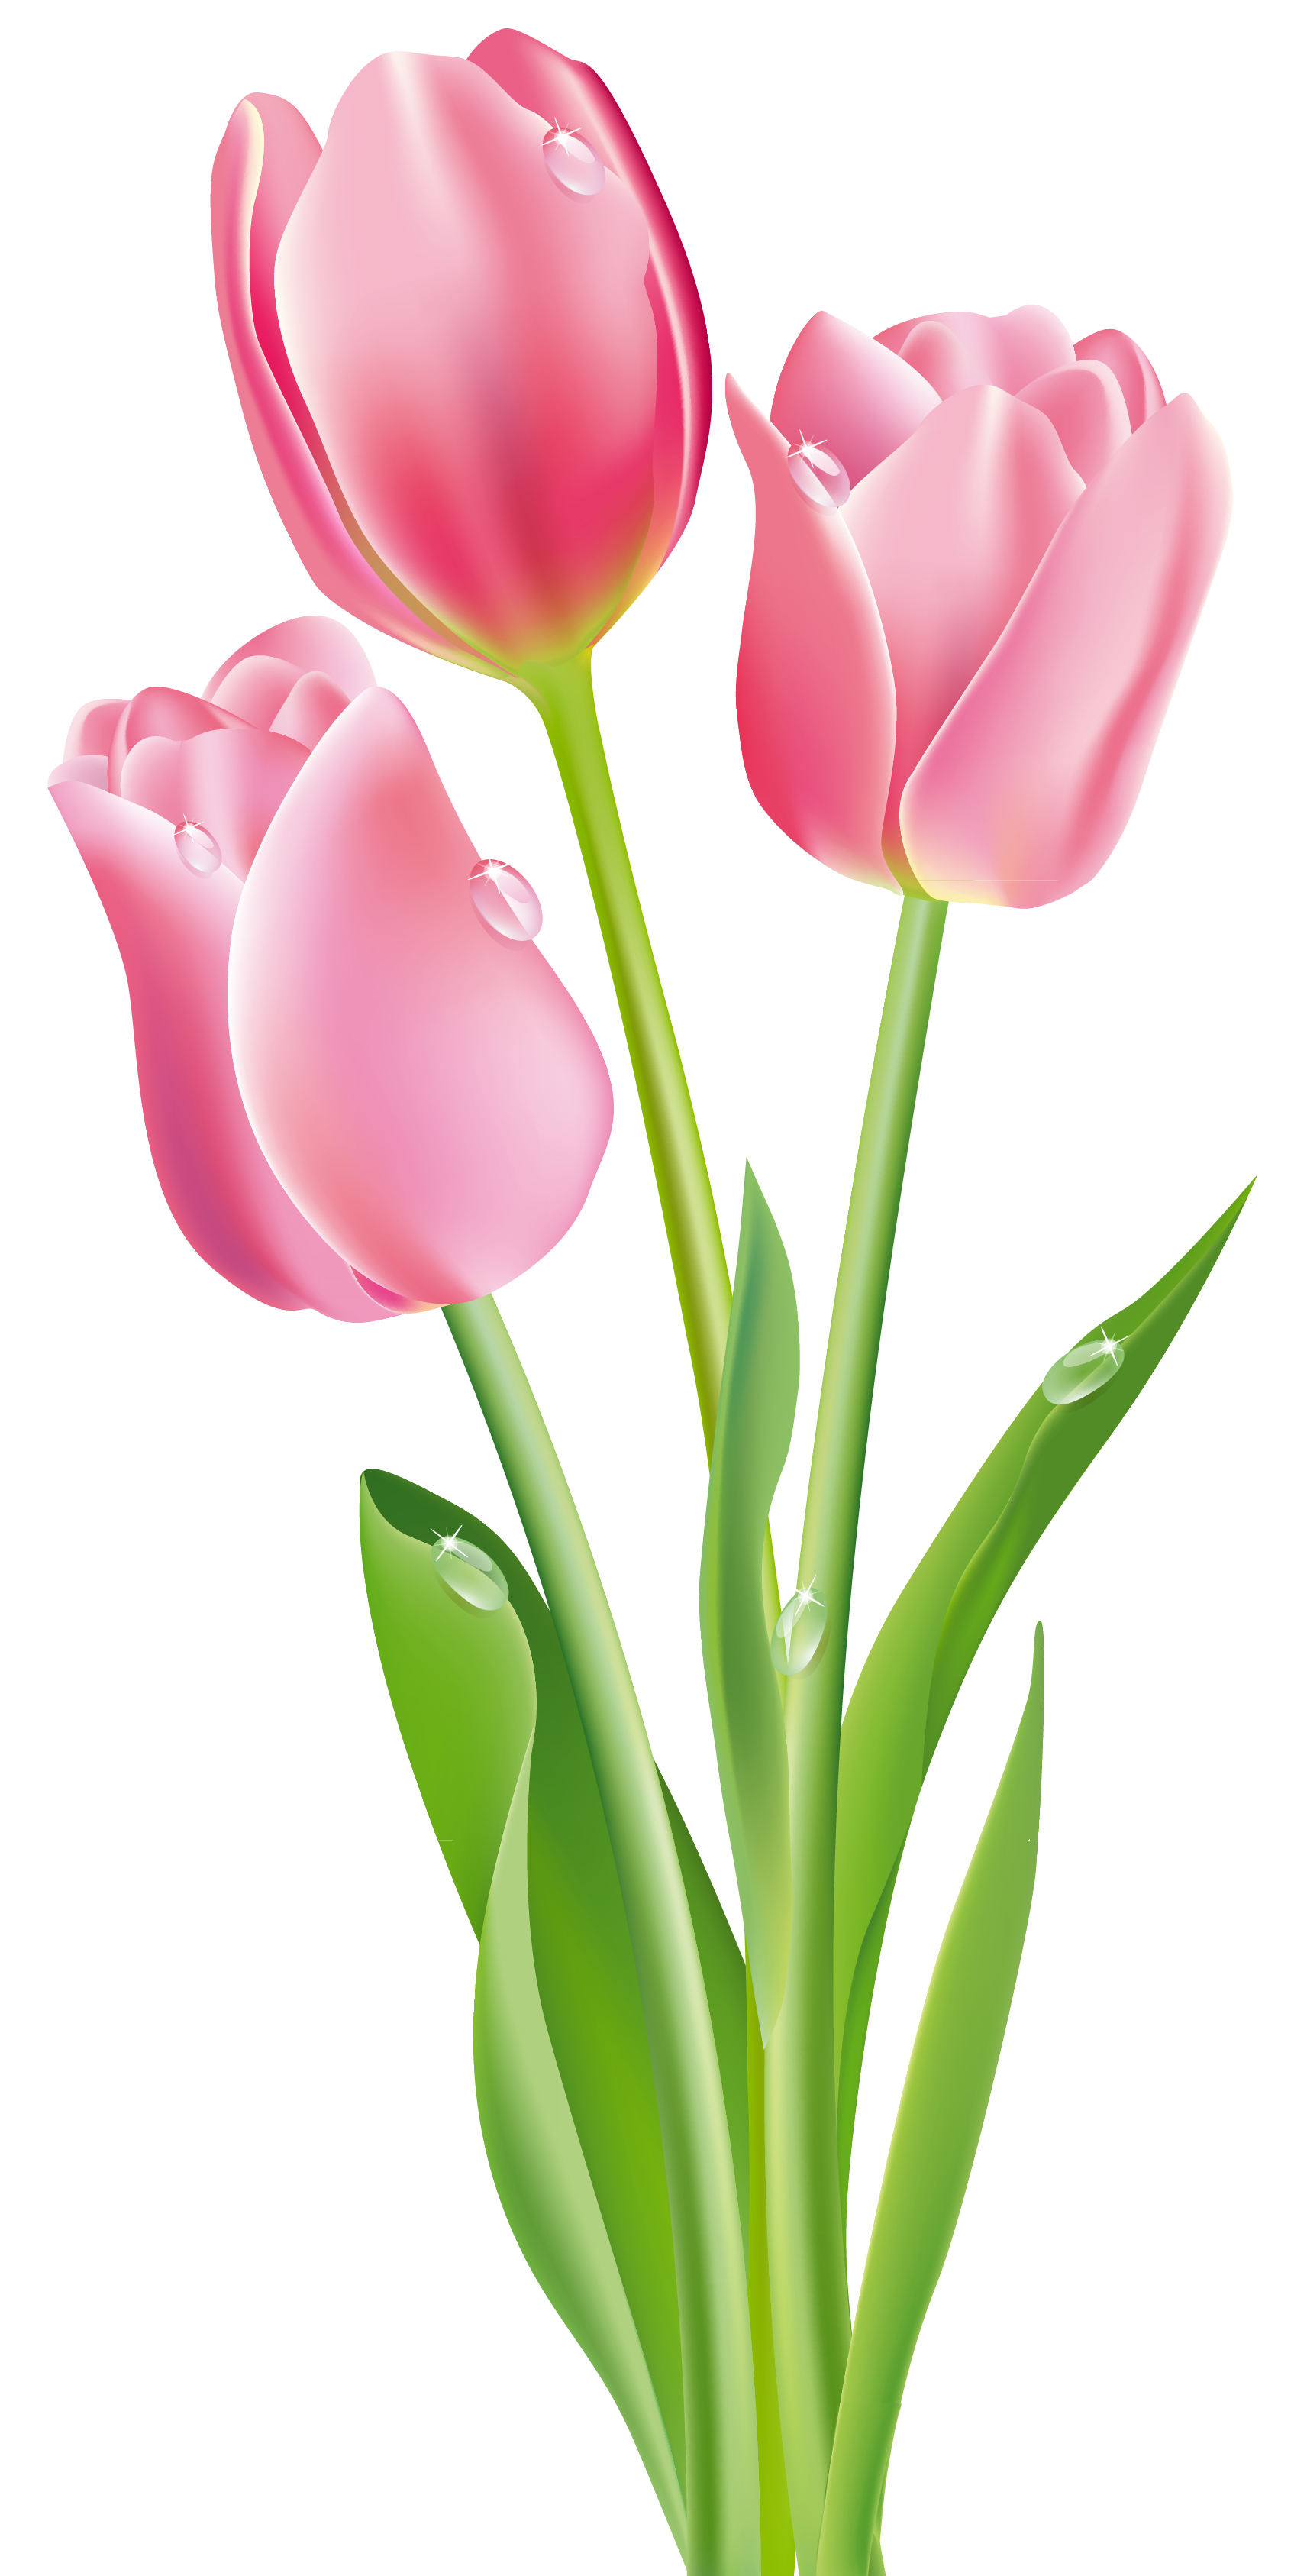 Pink tulips png image. Grass clipart tulip